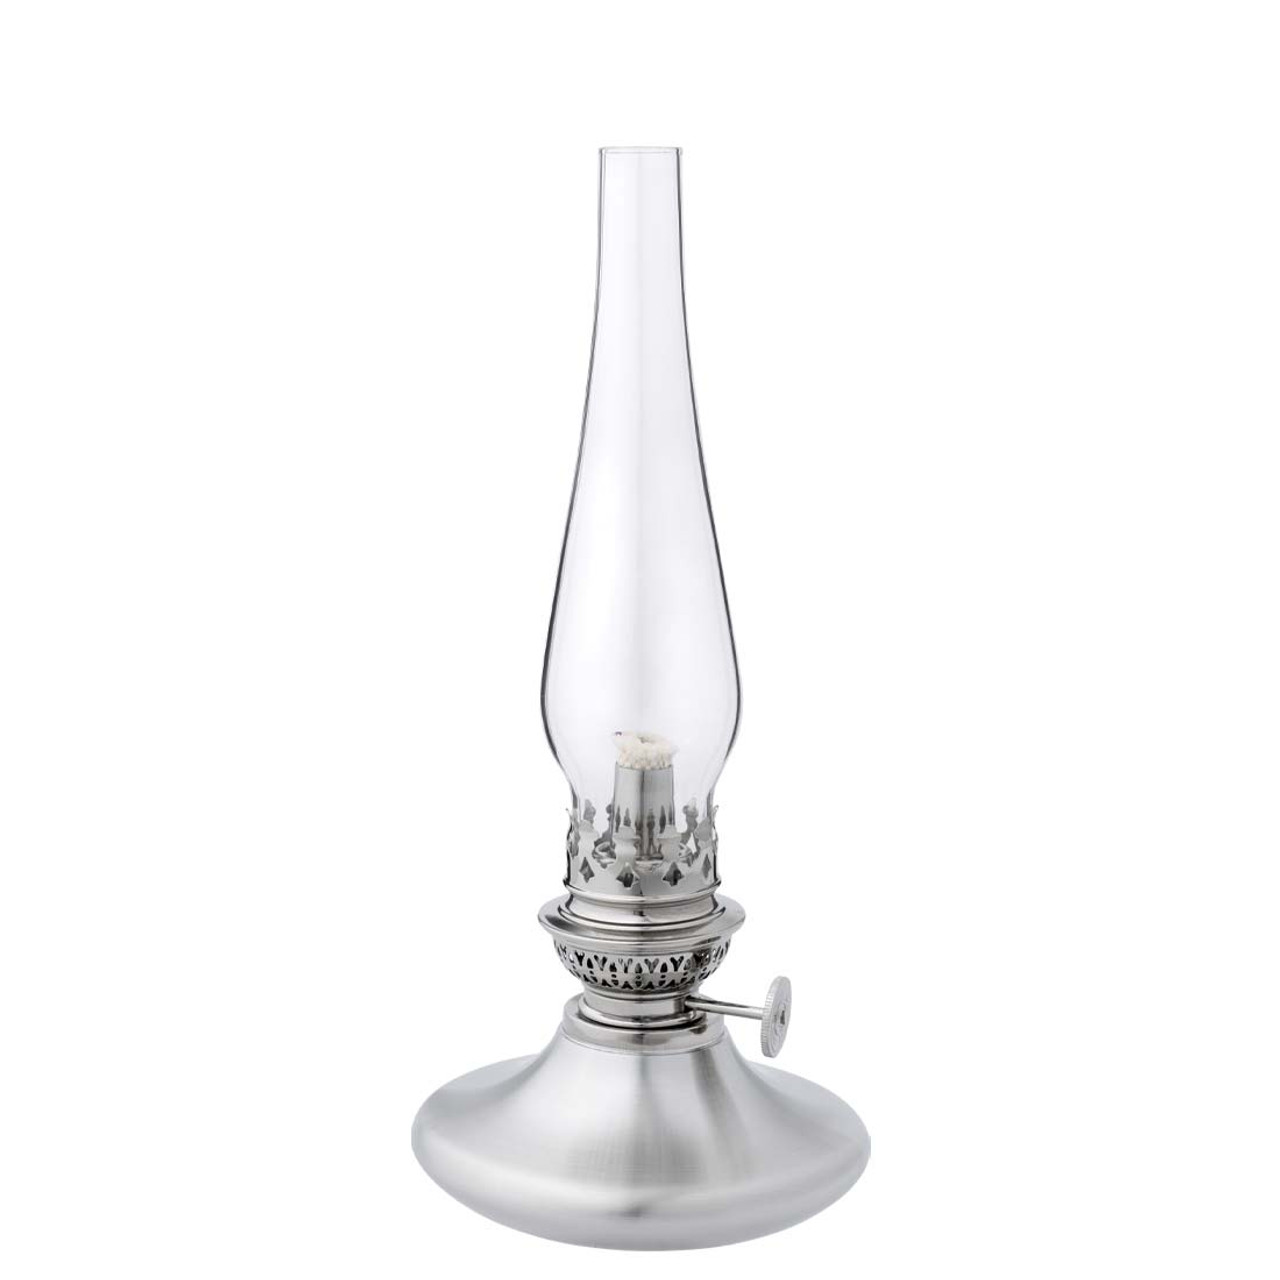 Concord Hurricane Oil Lamp, Solid Authentic Pewter | Made in the USA